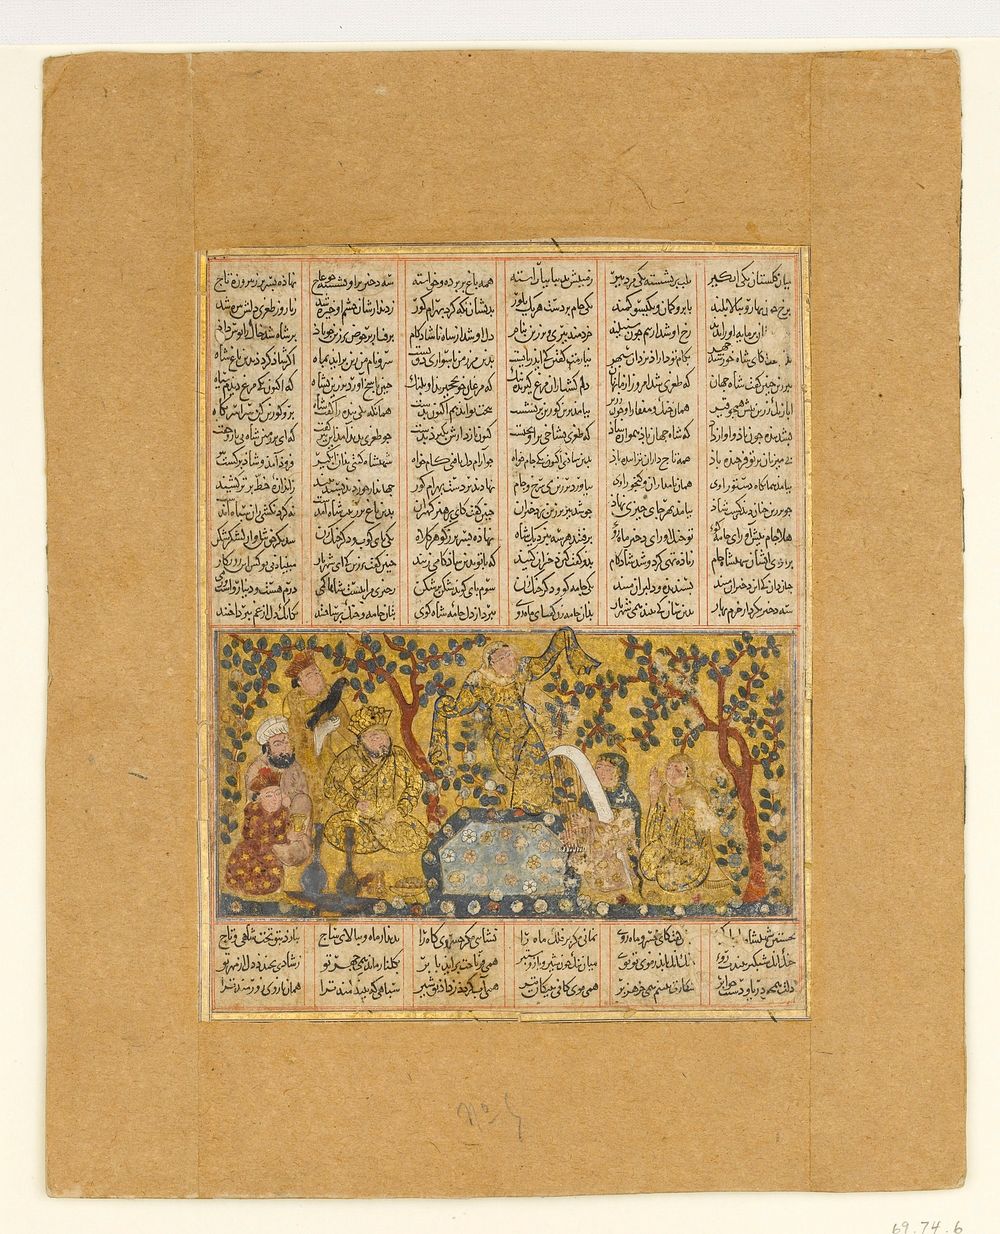 Bahram Gur Entertained by the Daughters of Barzin", Folio from a Shahnama (Book of Kings), Abu'l Qasim Firdausi (author)